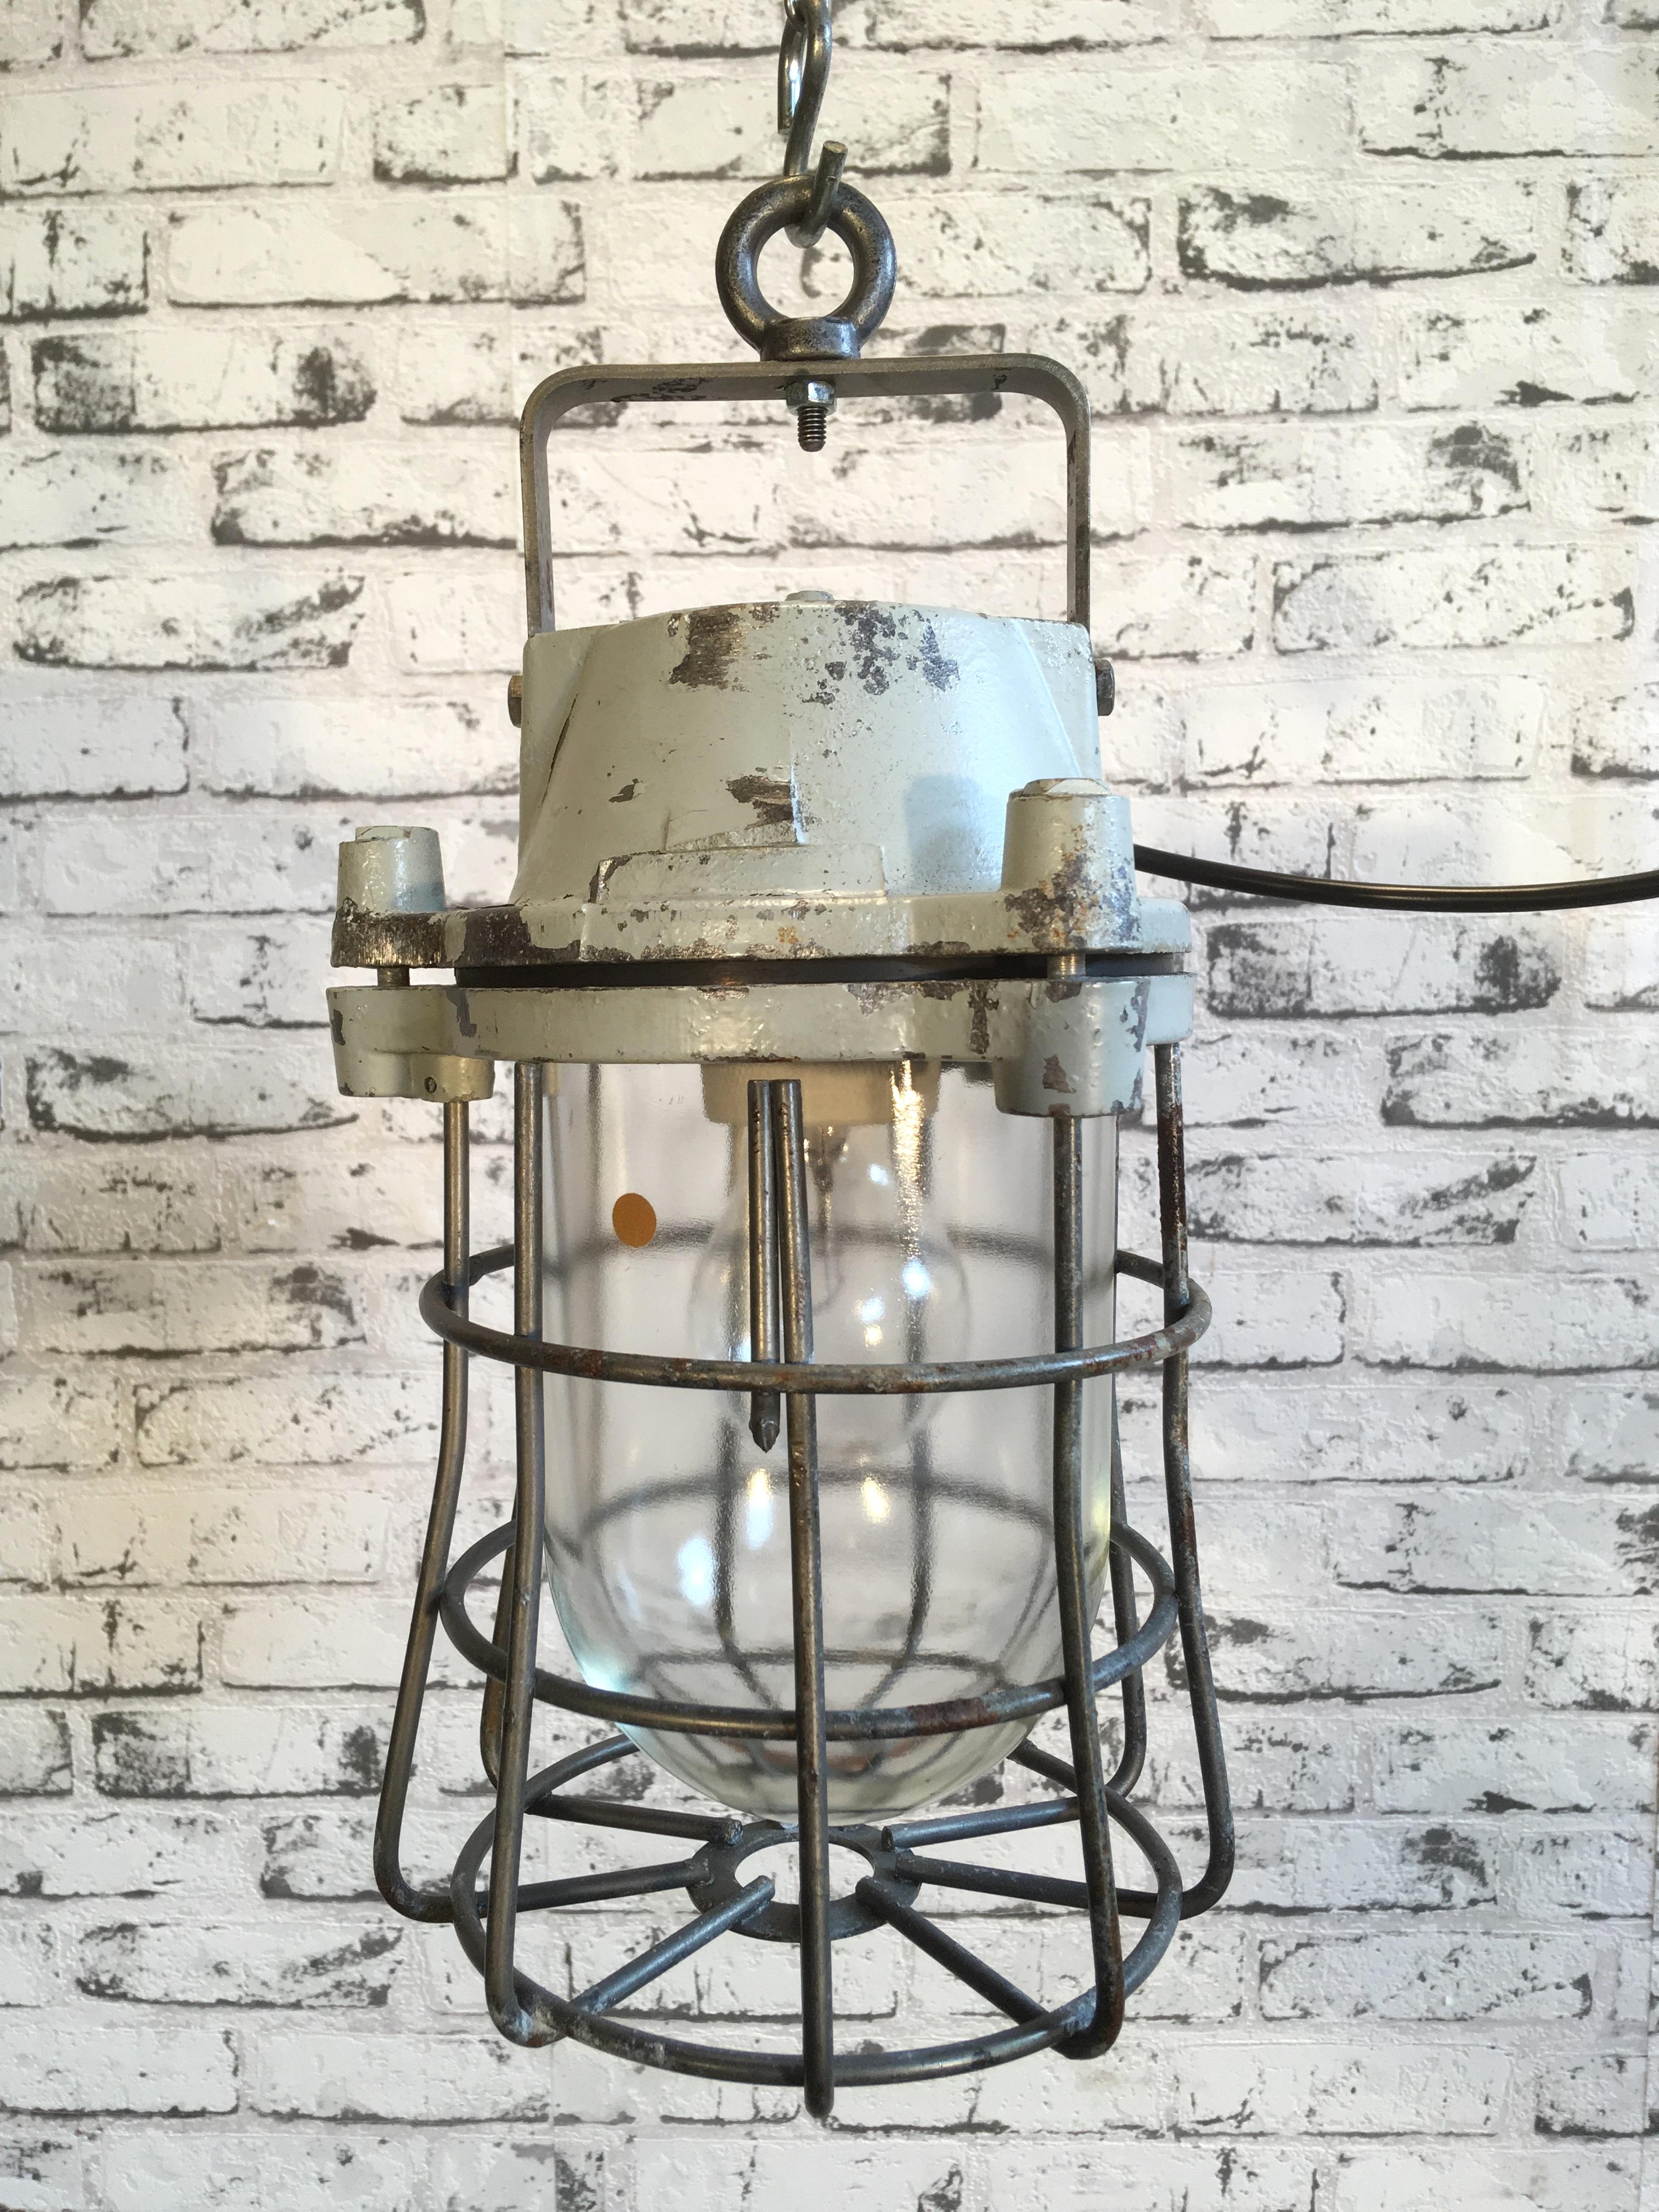 This industrial light was manufactured in former Czechoslovakia in the 1960s. Bunker, factory or mine lamp has cast aluminium body, iron cage and explosion-proof glass.
Very good vintage condition. Weight 4 kg. Newly wired.